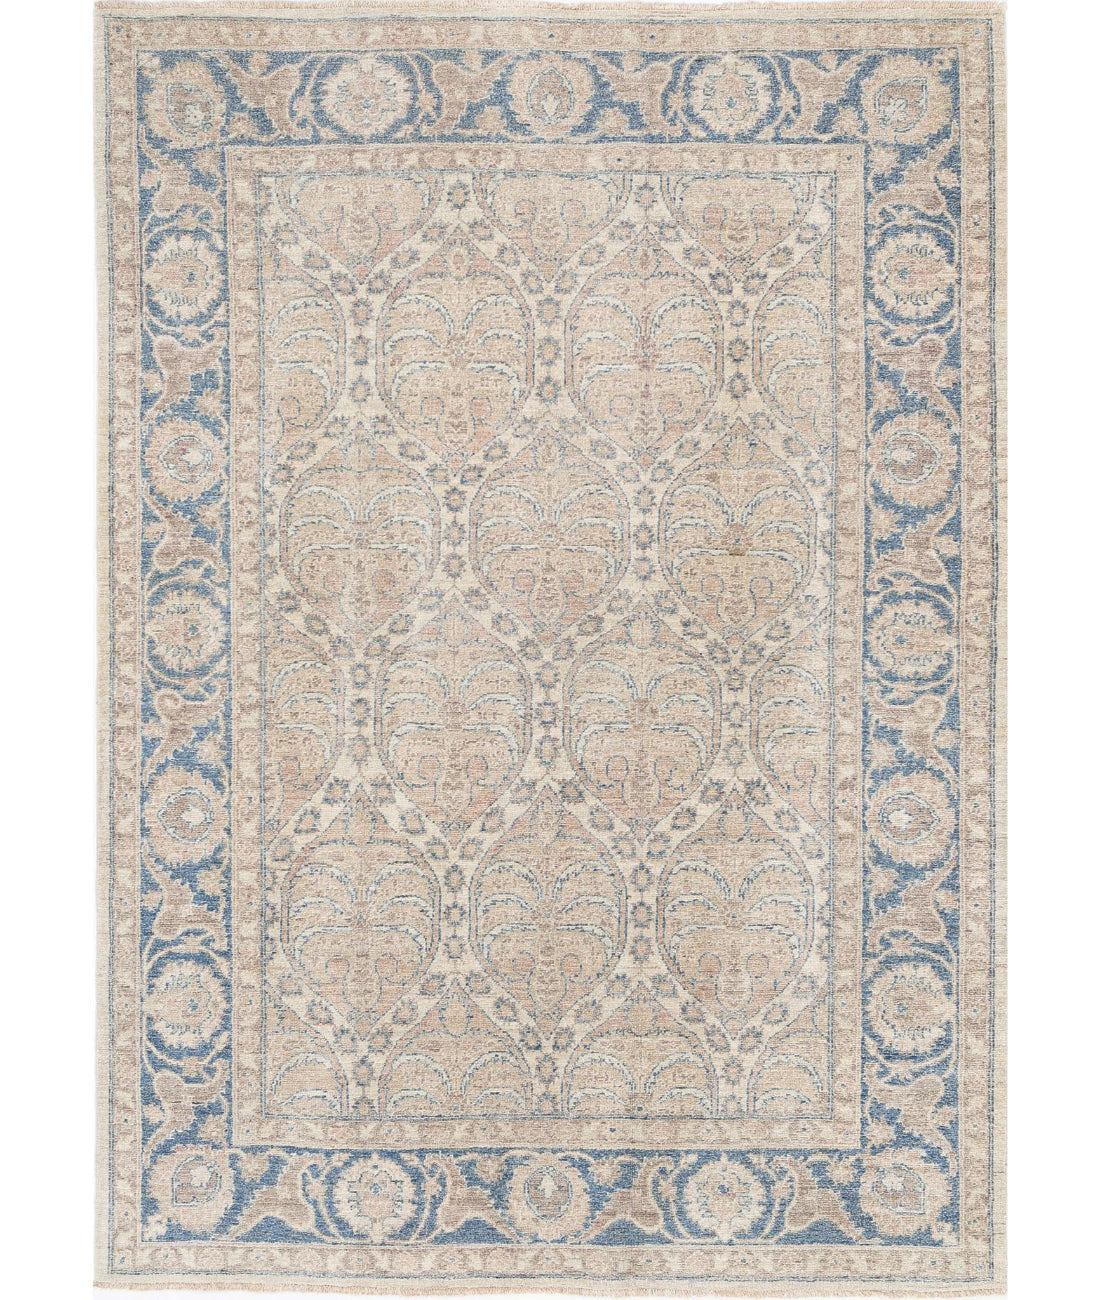 Hand Knotted Serenity Wool Rug - 5'6'' x 7'9'' 5'6'' x 7'9'' (165 X 233) / Ivory / Blue